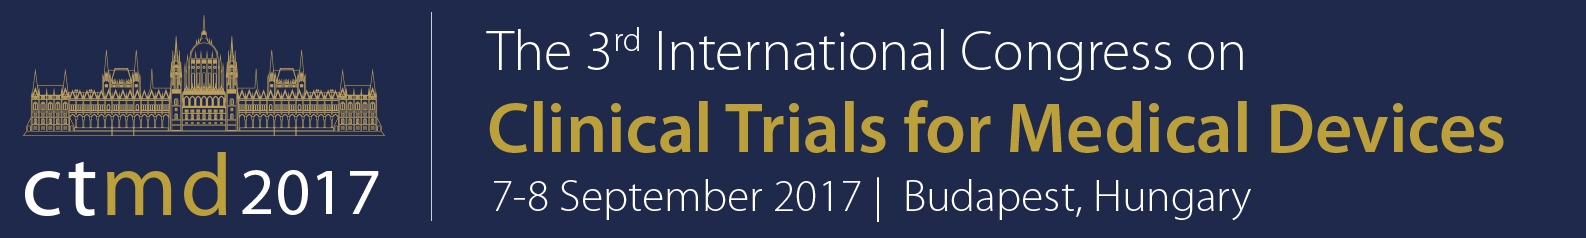 Internationaler Kongress: „Clinical Trials for Medical Devices“ 2017